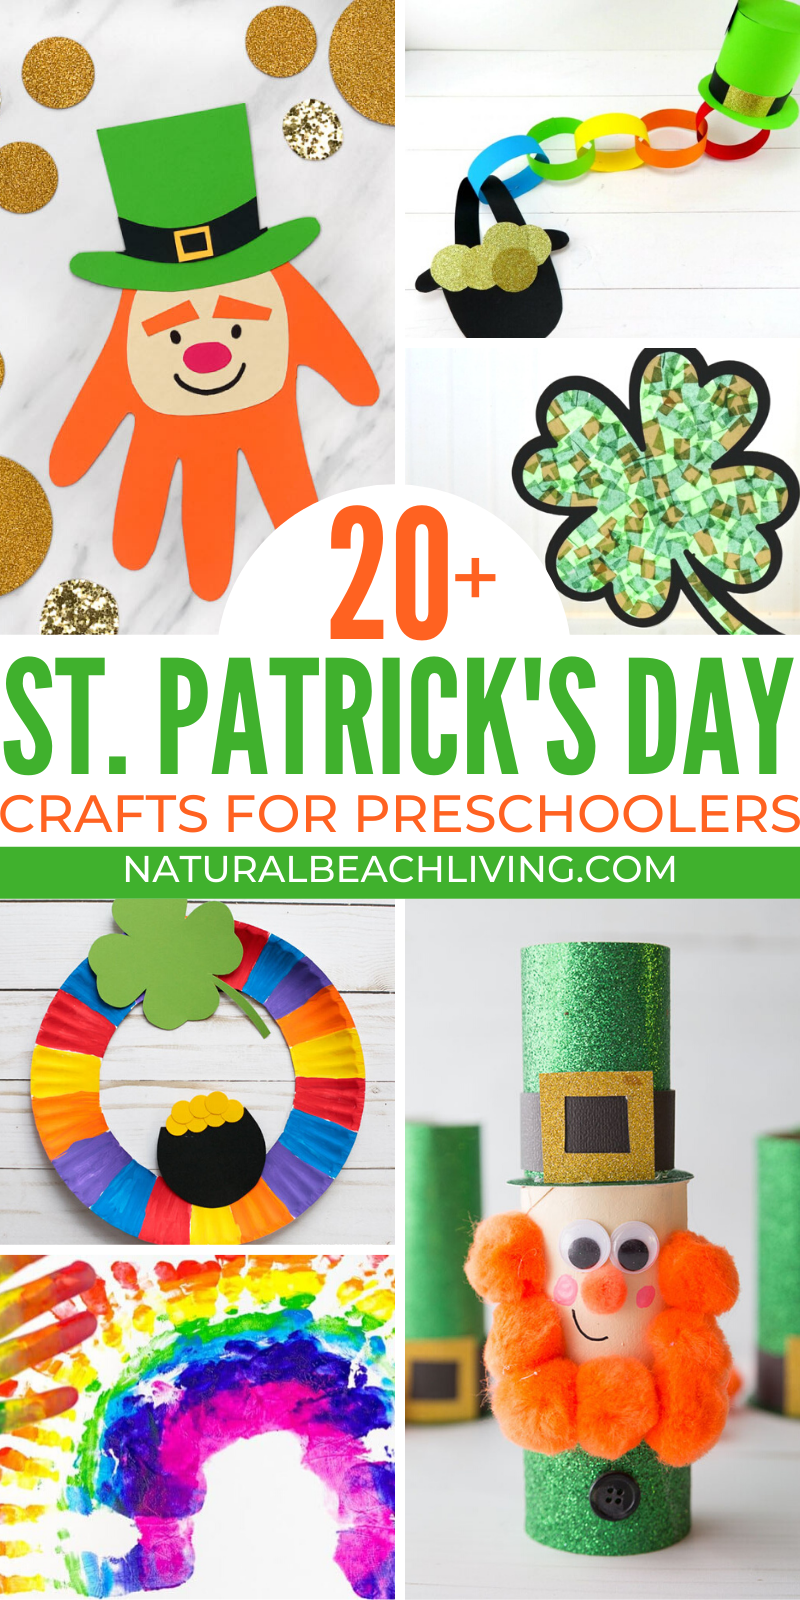 St Patrick's Day Scavenger Hunt Printable Clues, Grab these free St. Patrick's Day Printables for A Fun and Festive Activity for All Ages. A Treasure Hunt can be such a great game